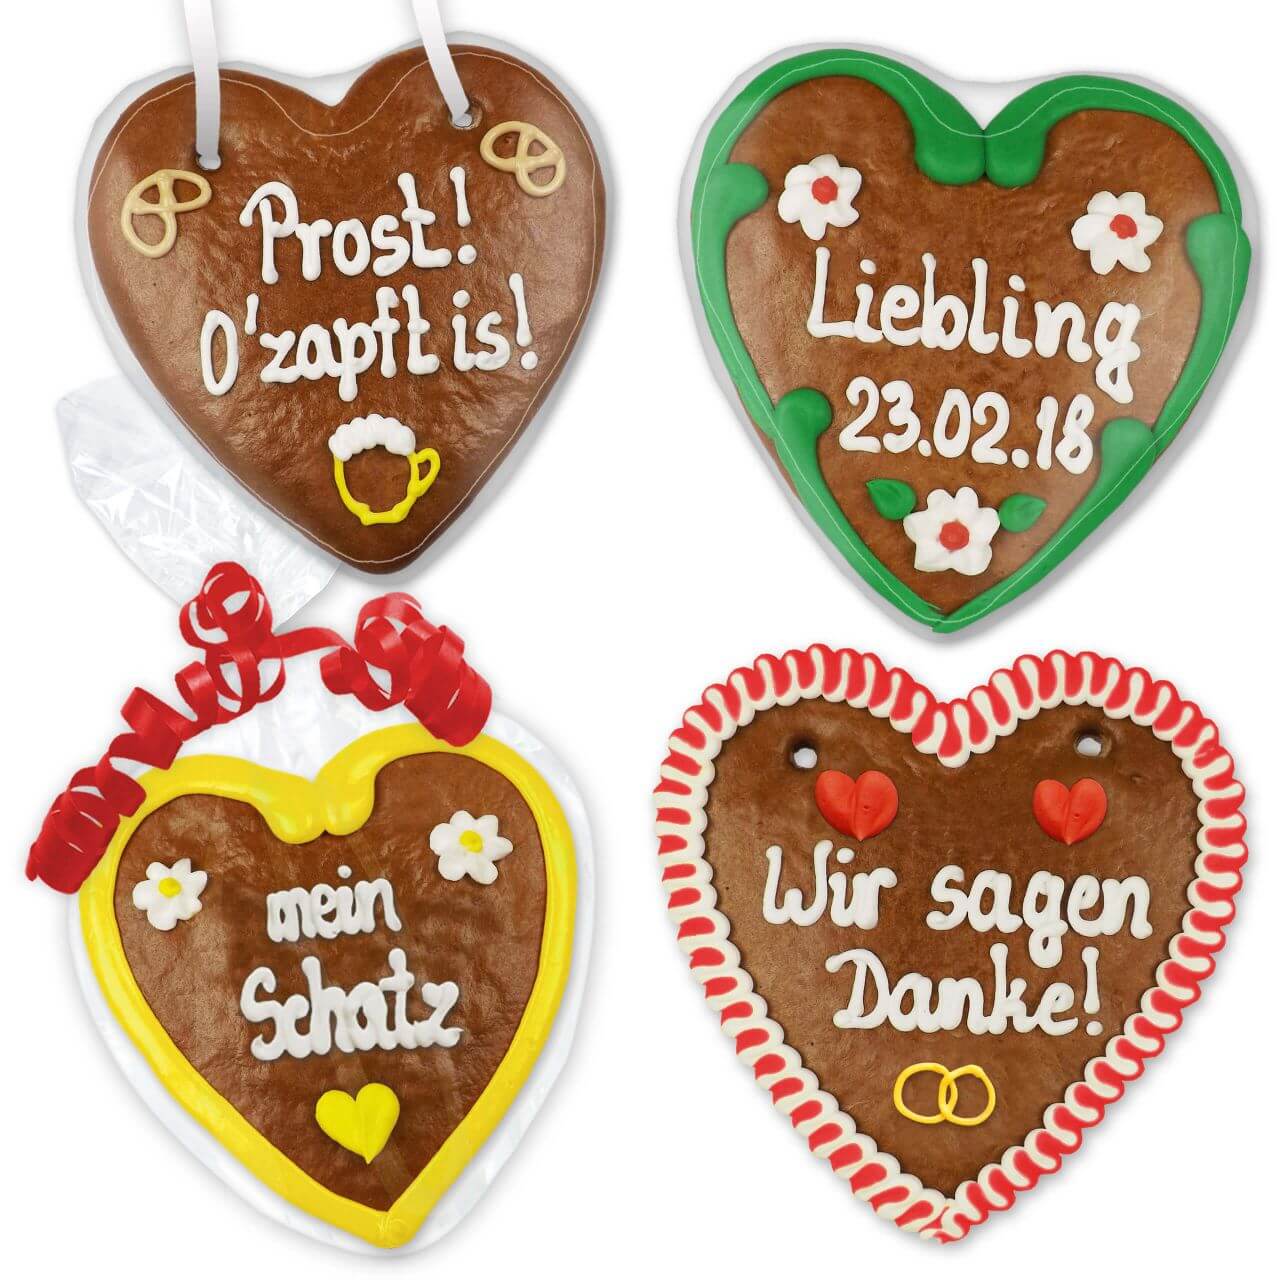 14cm gingerbread heart Designed according to your wishes